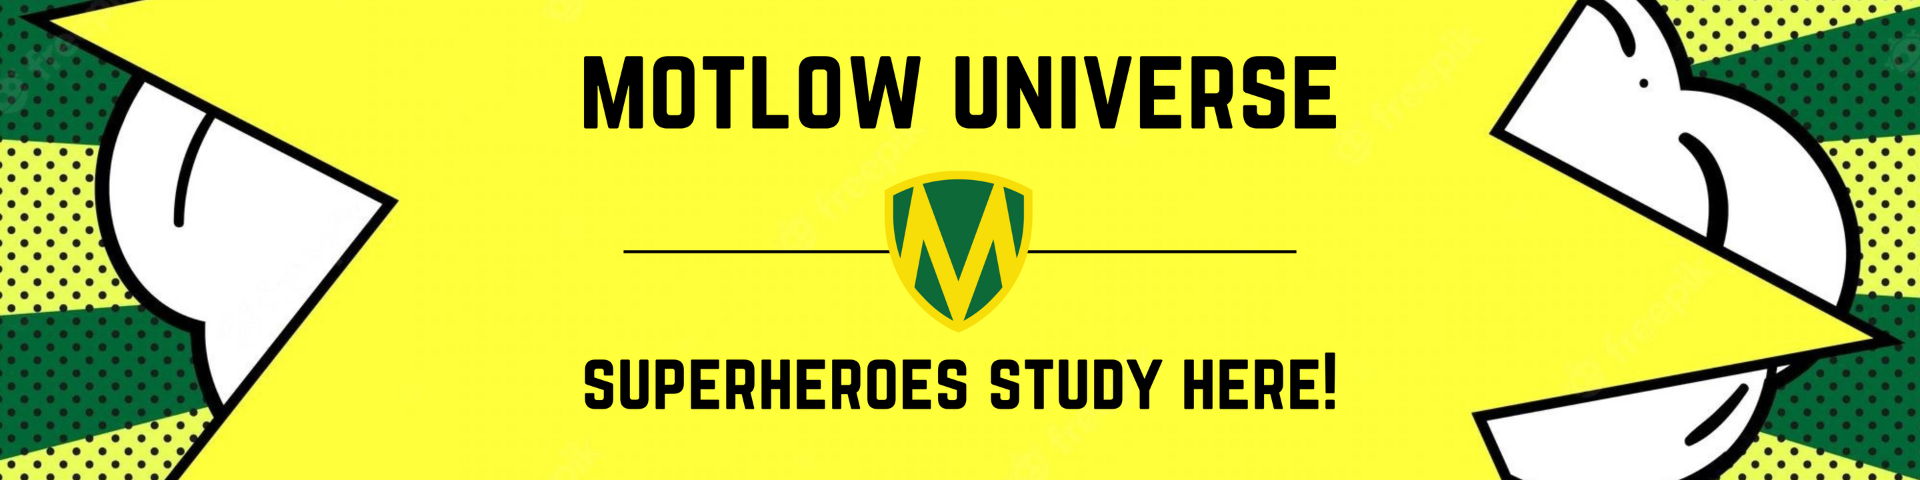 Exploding yellow jagged banner reading "Motlow Universe, Superheroes Study Here" in front of green and yellow comic book style sunrays